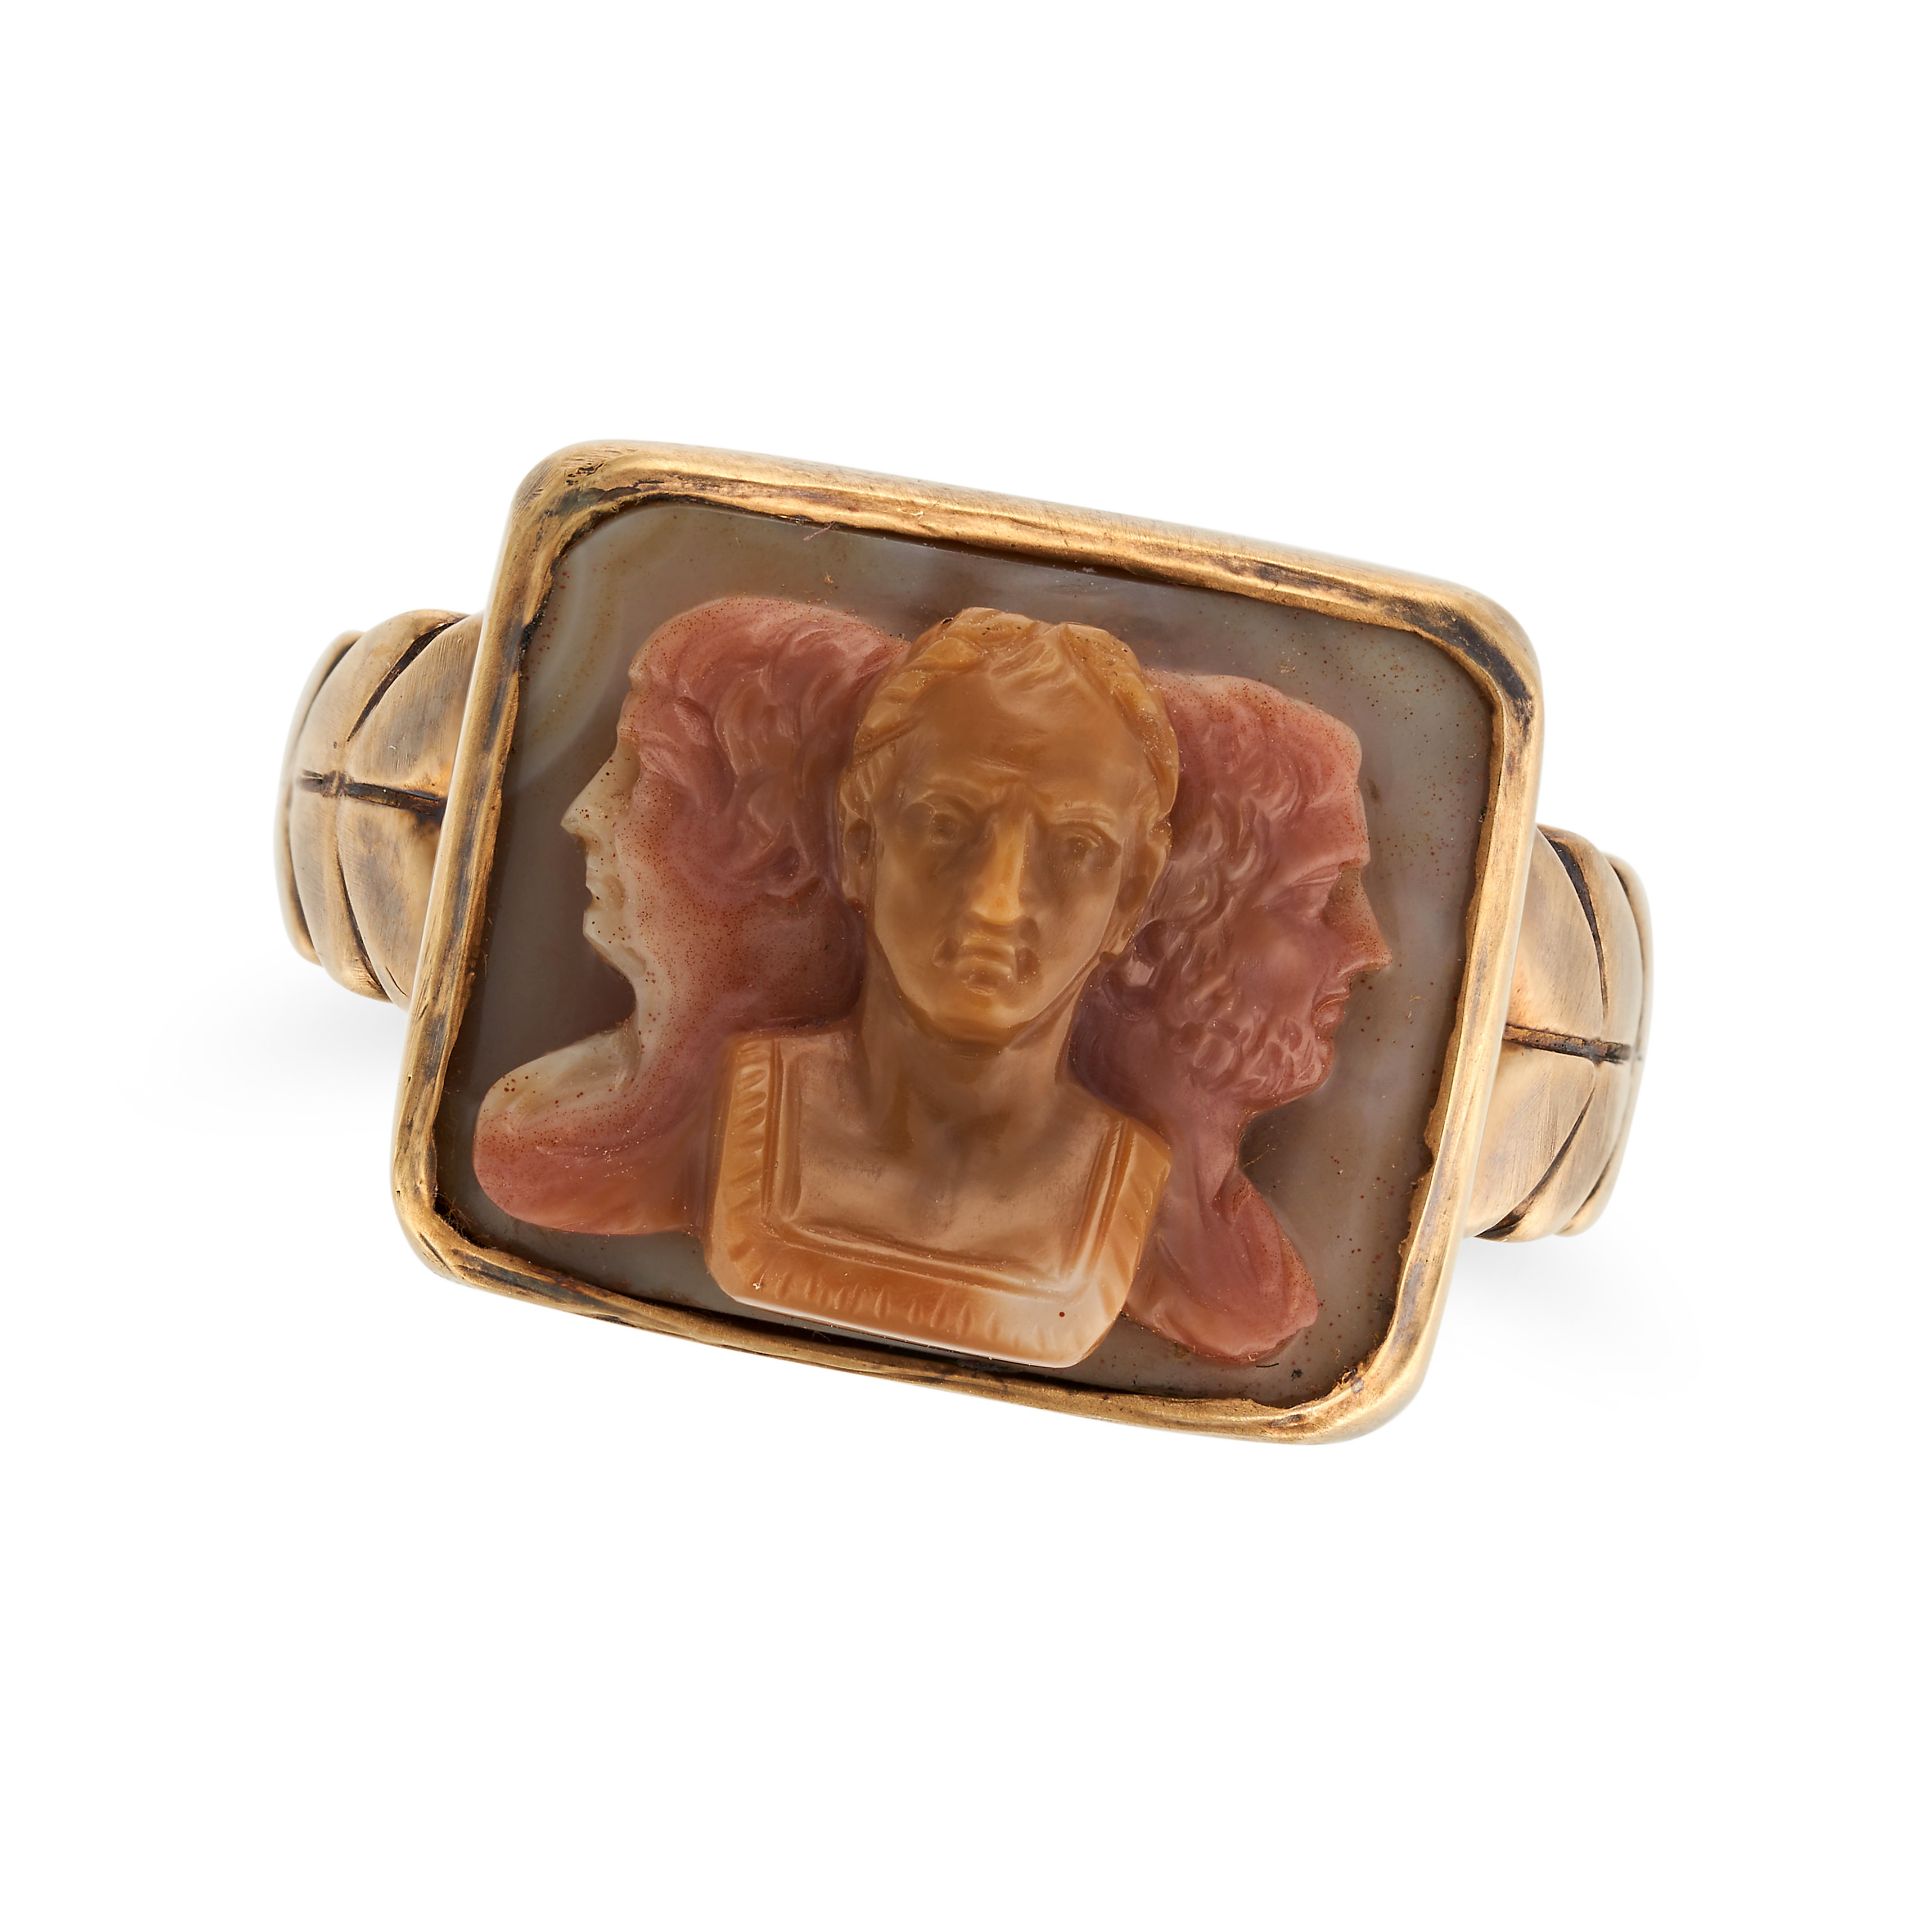 A FINE ANTIQUE AGATE CAMEO RING in yellow gold, set with an agate cameo carved to depict the bust...